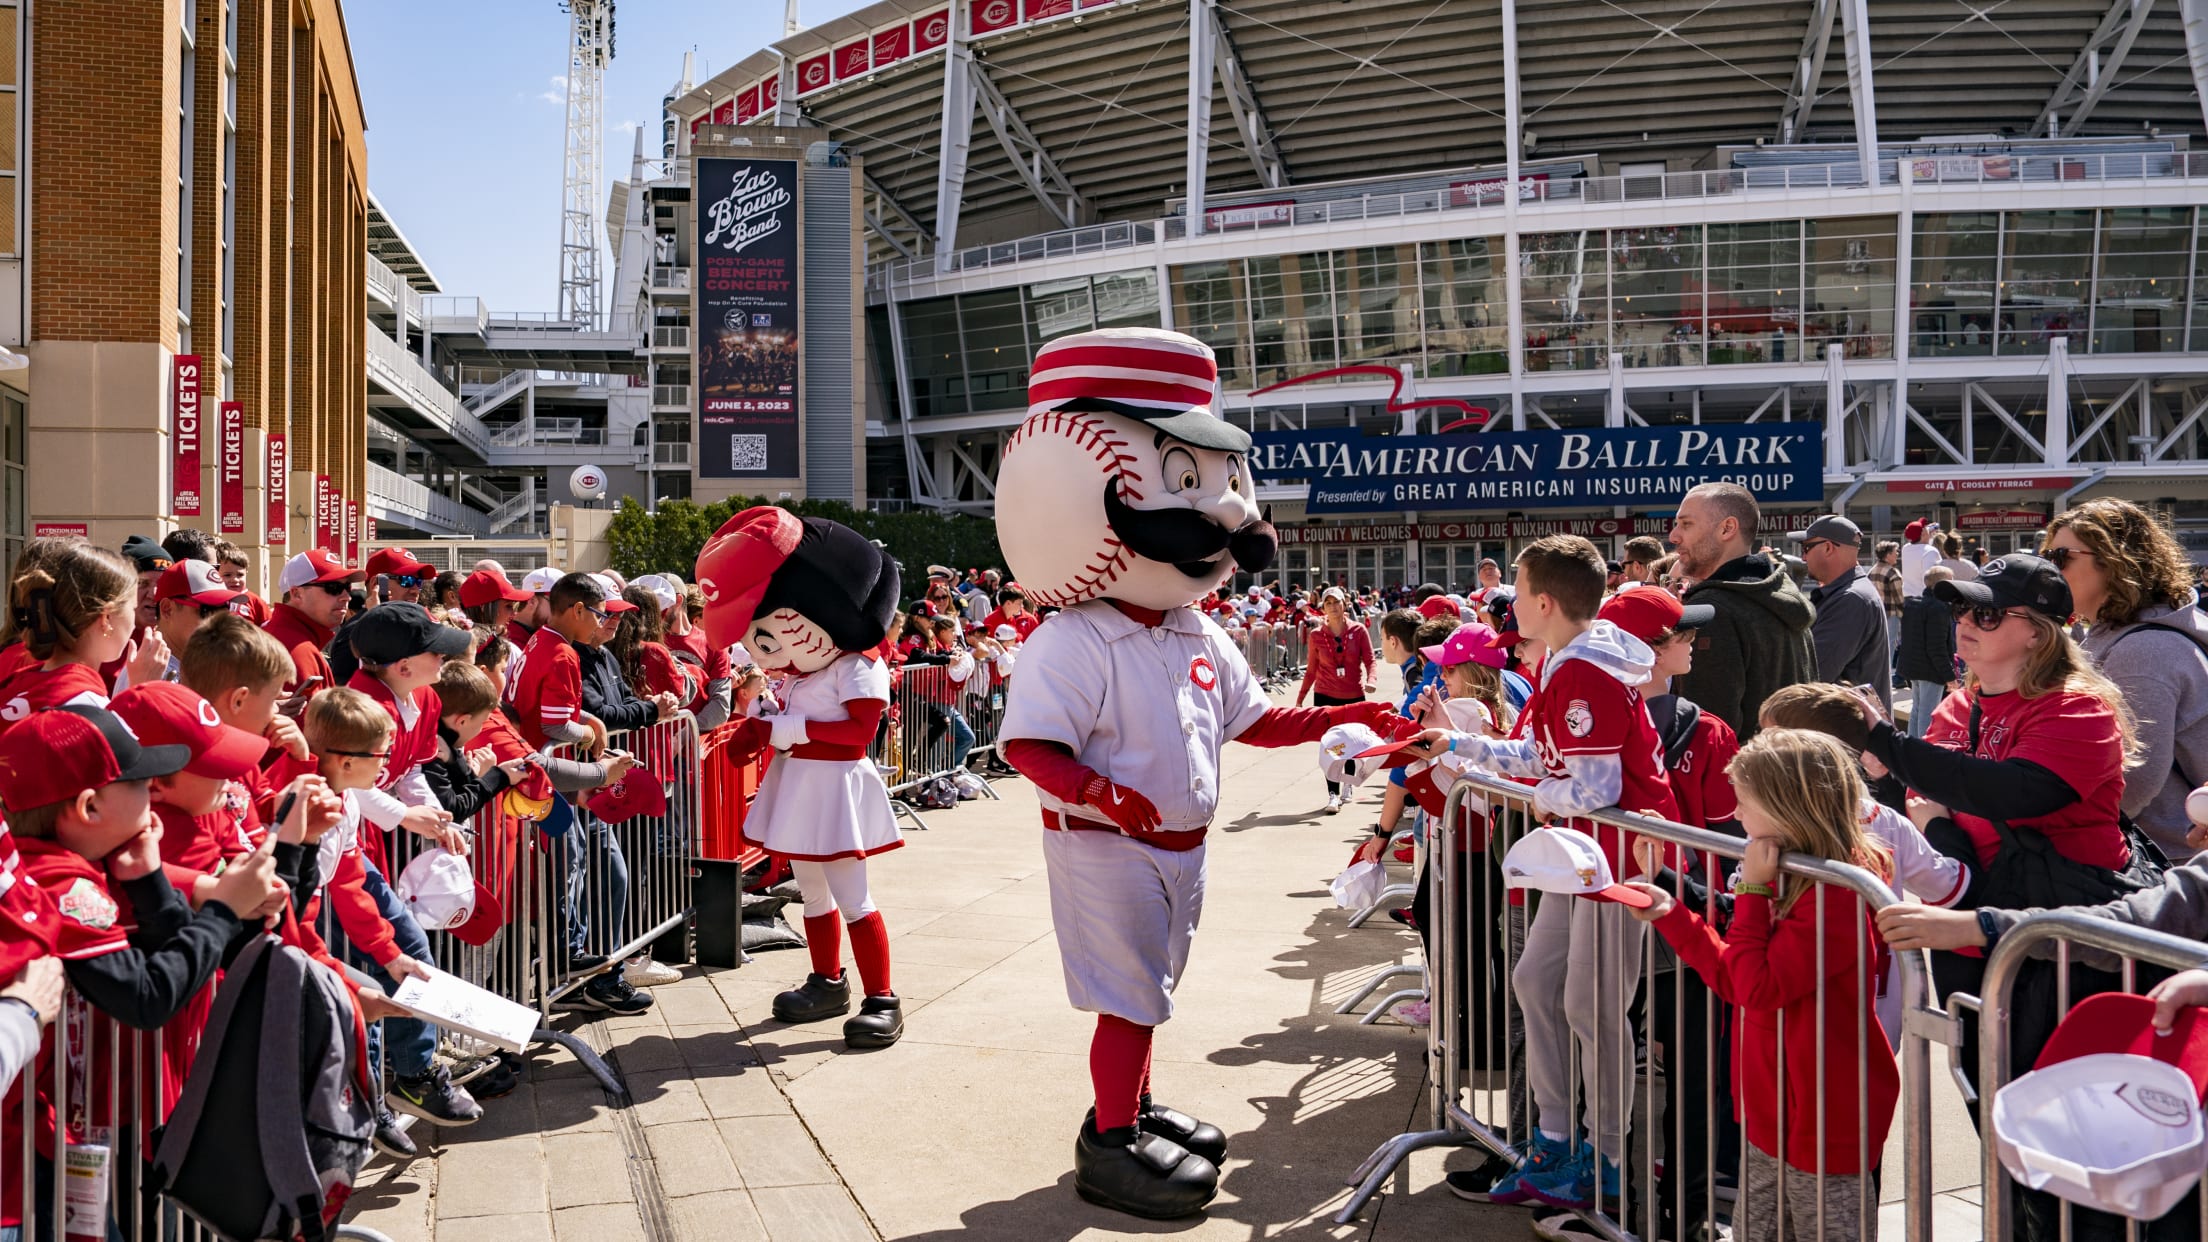 Cincinnati Reds - Labor Day celebration is starting early!